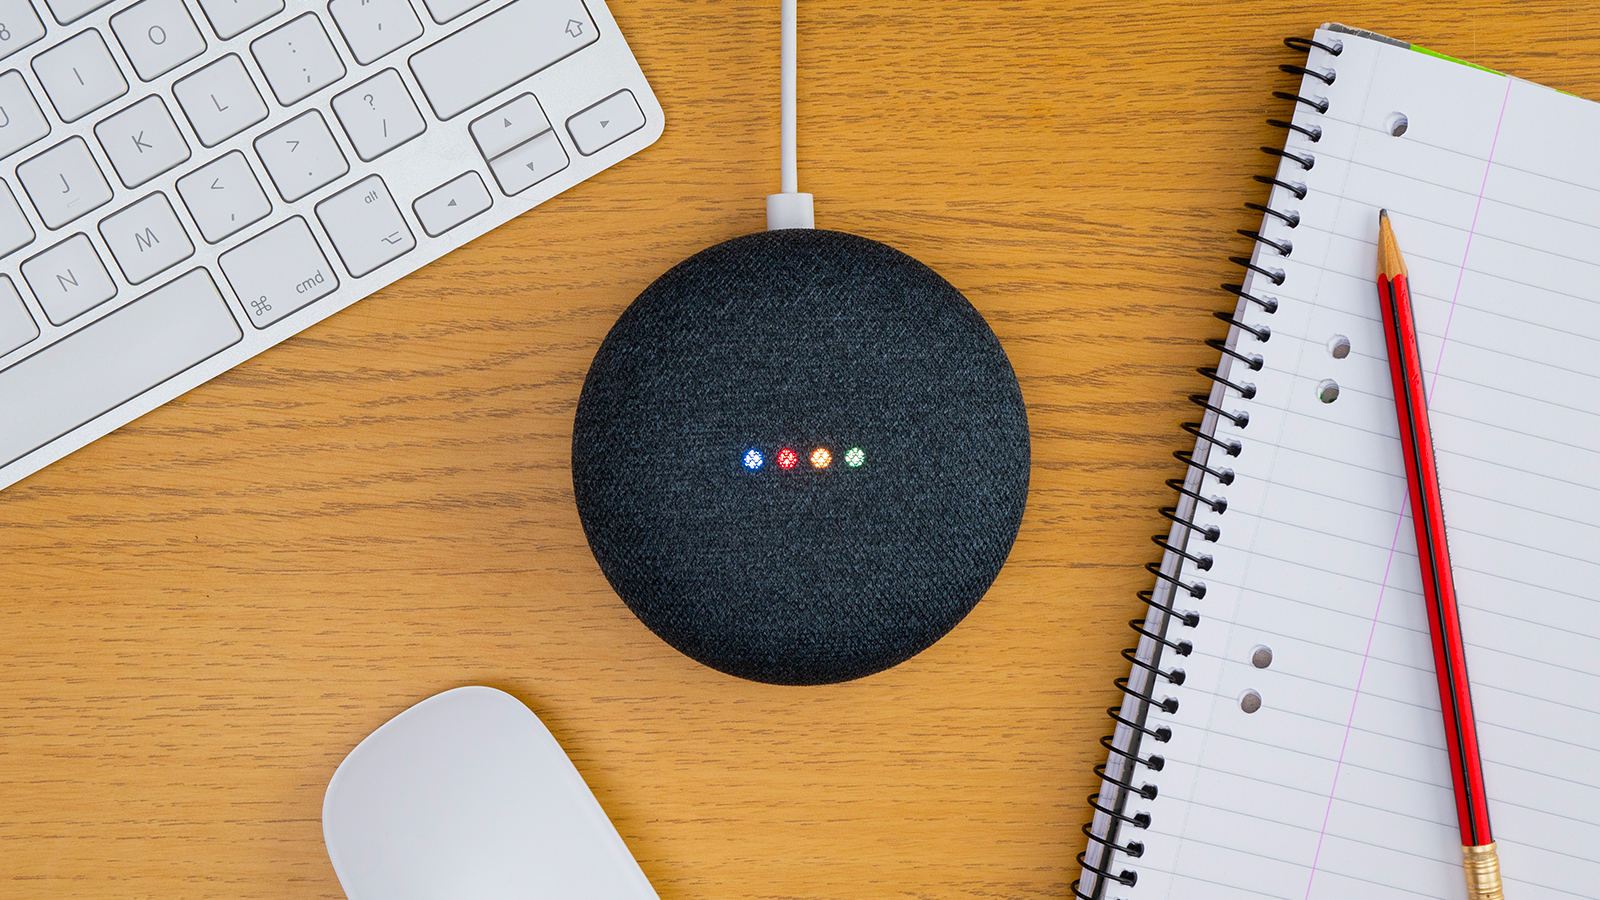 How Google Assistant, Alexa and Siri can be hacked to give users malicious responses